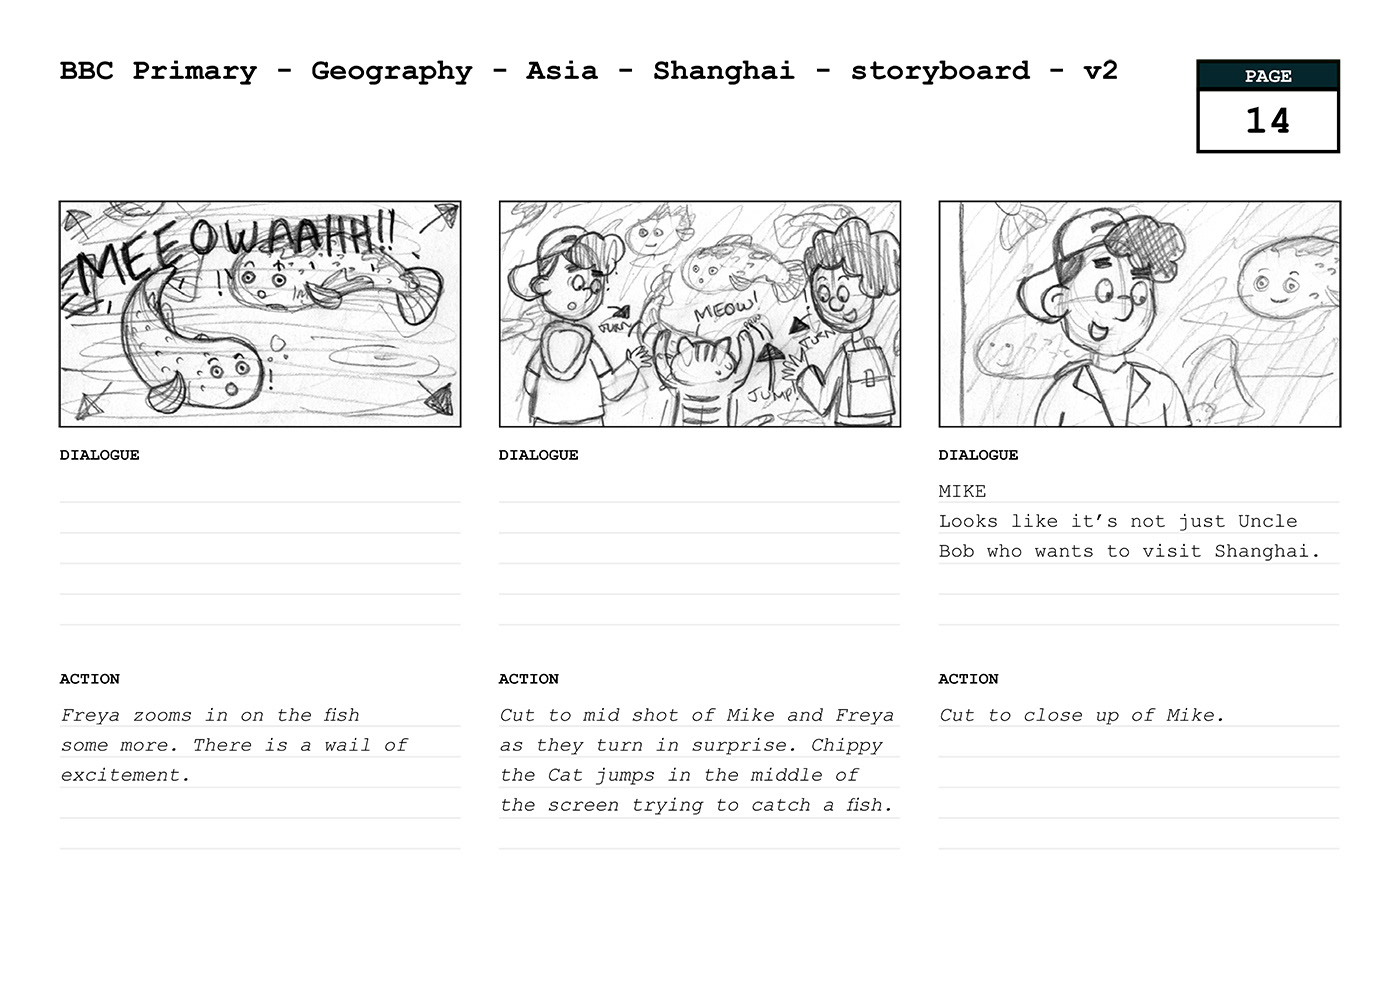 Sample storyboard for a Geography animation.